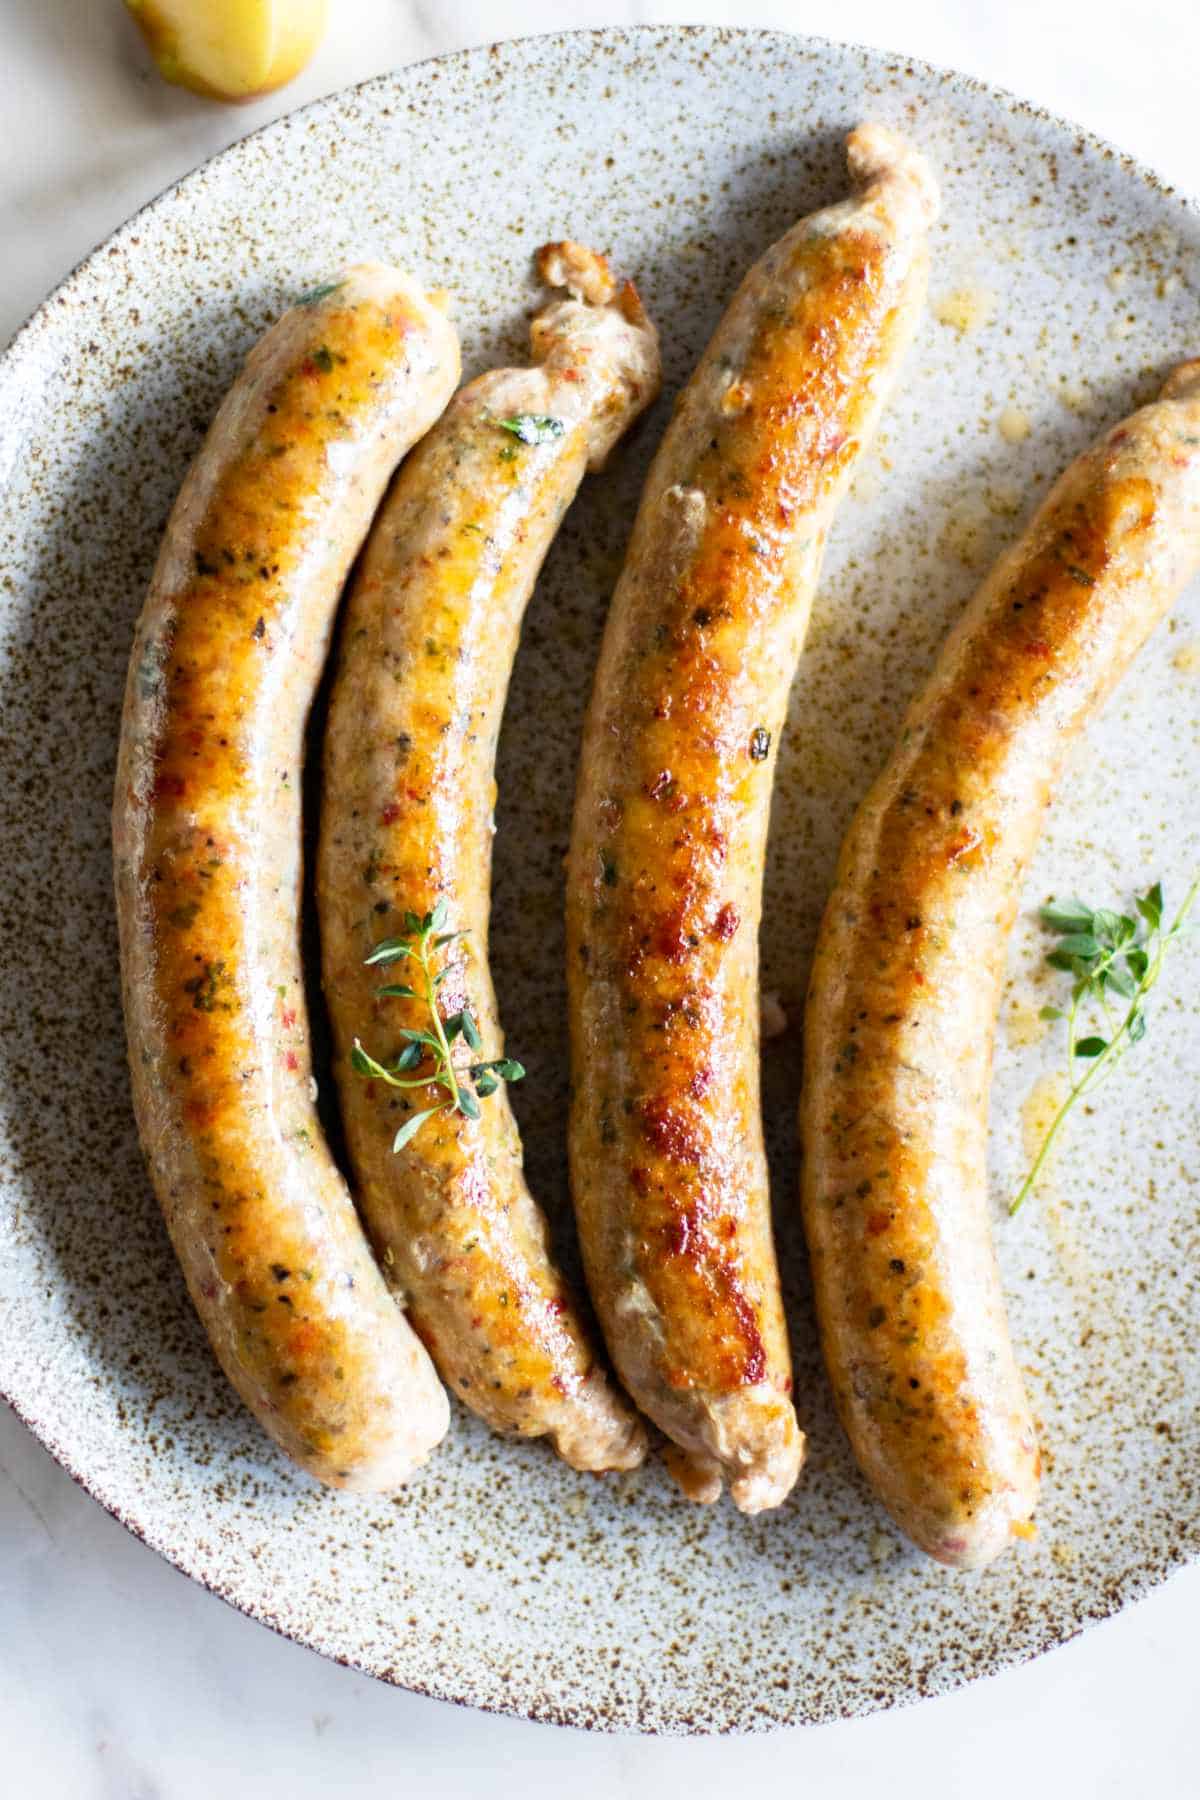 fried sausages on a plate.